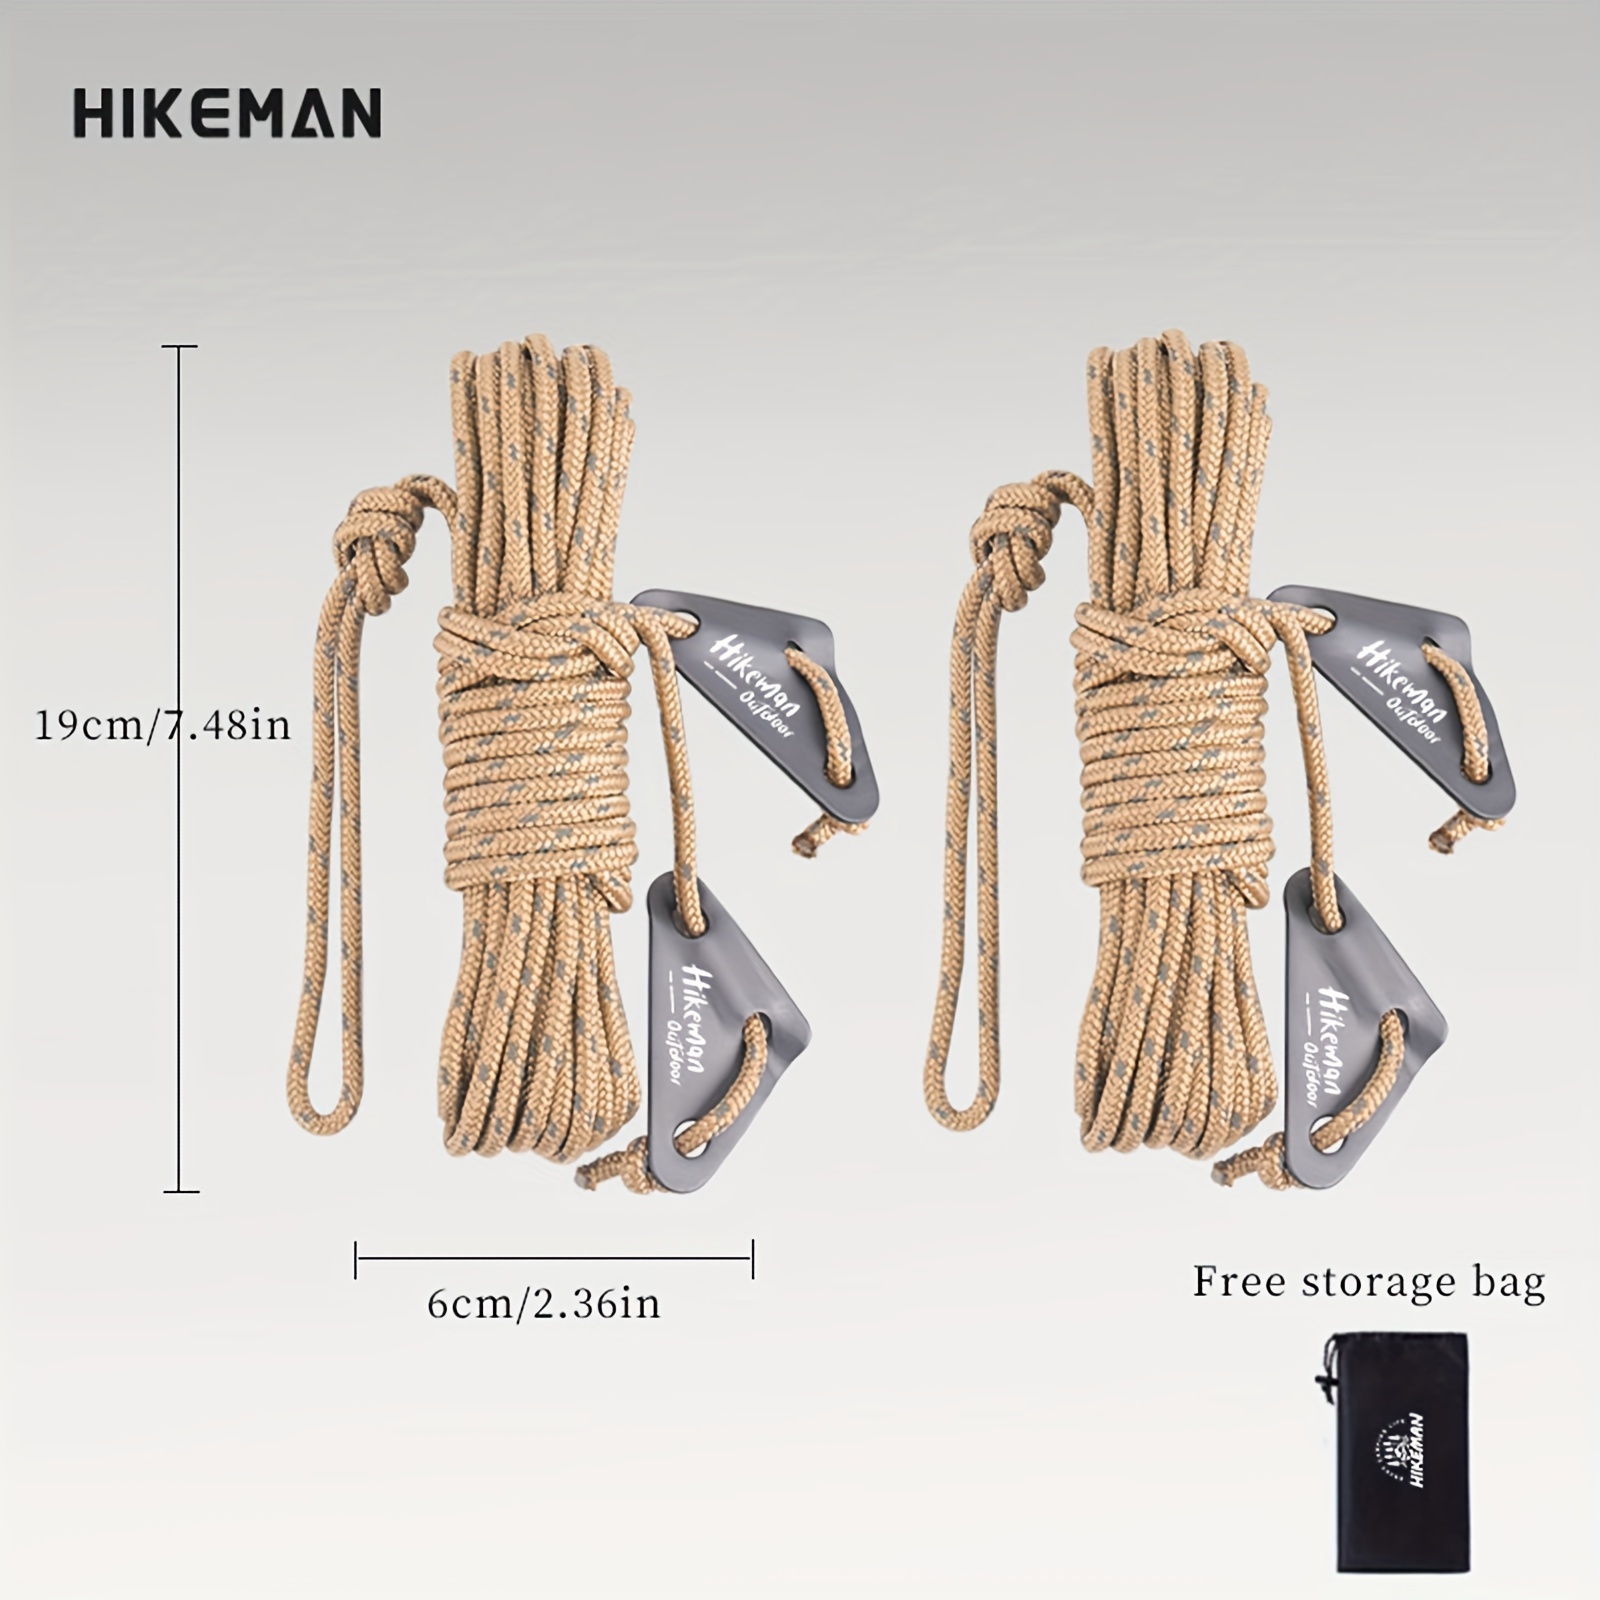 HIKEMAN Tent Guy Ropes - 4mm Reflective Cord Tent Guide Rope with Aluminum  Adjuster,for Outdoor Camping Hiking Awning Tents